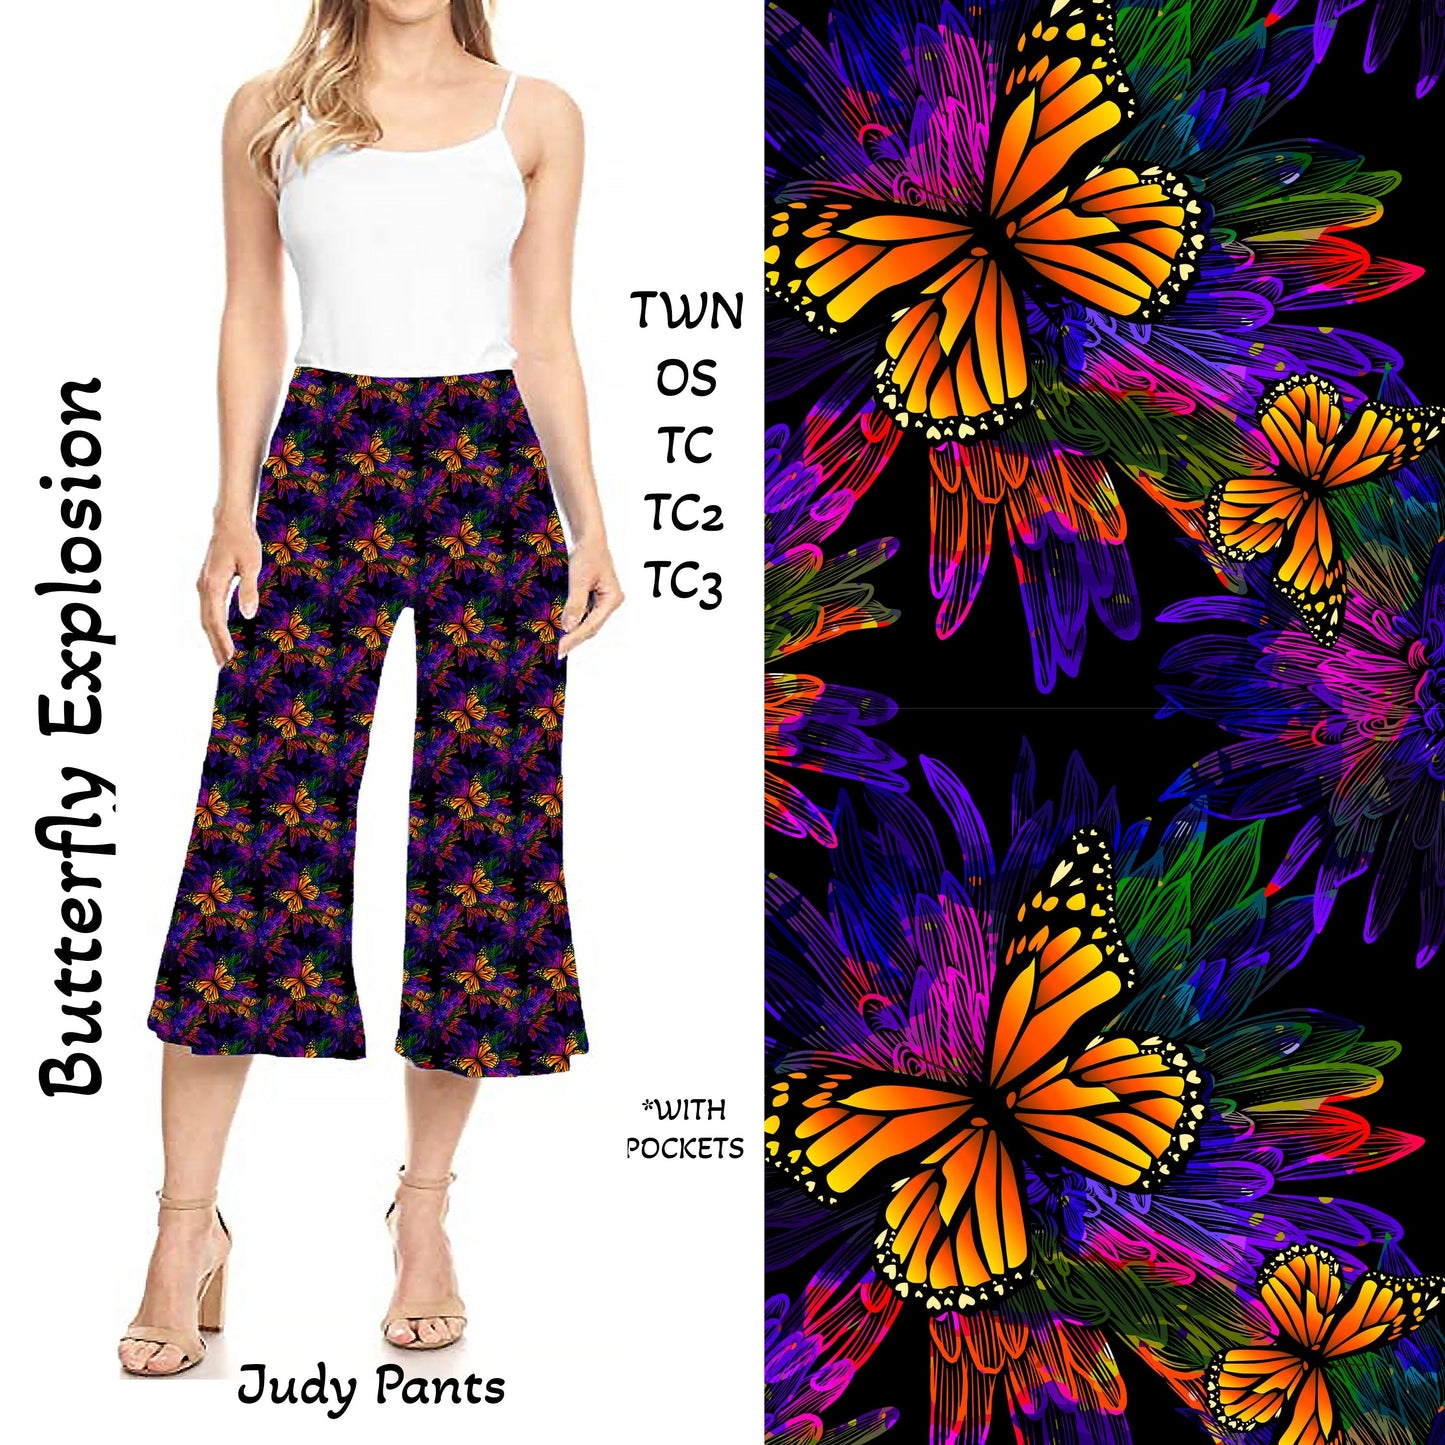 Butterfly Explosion Judy Pants with Pockets